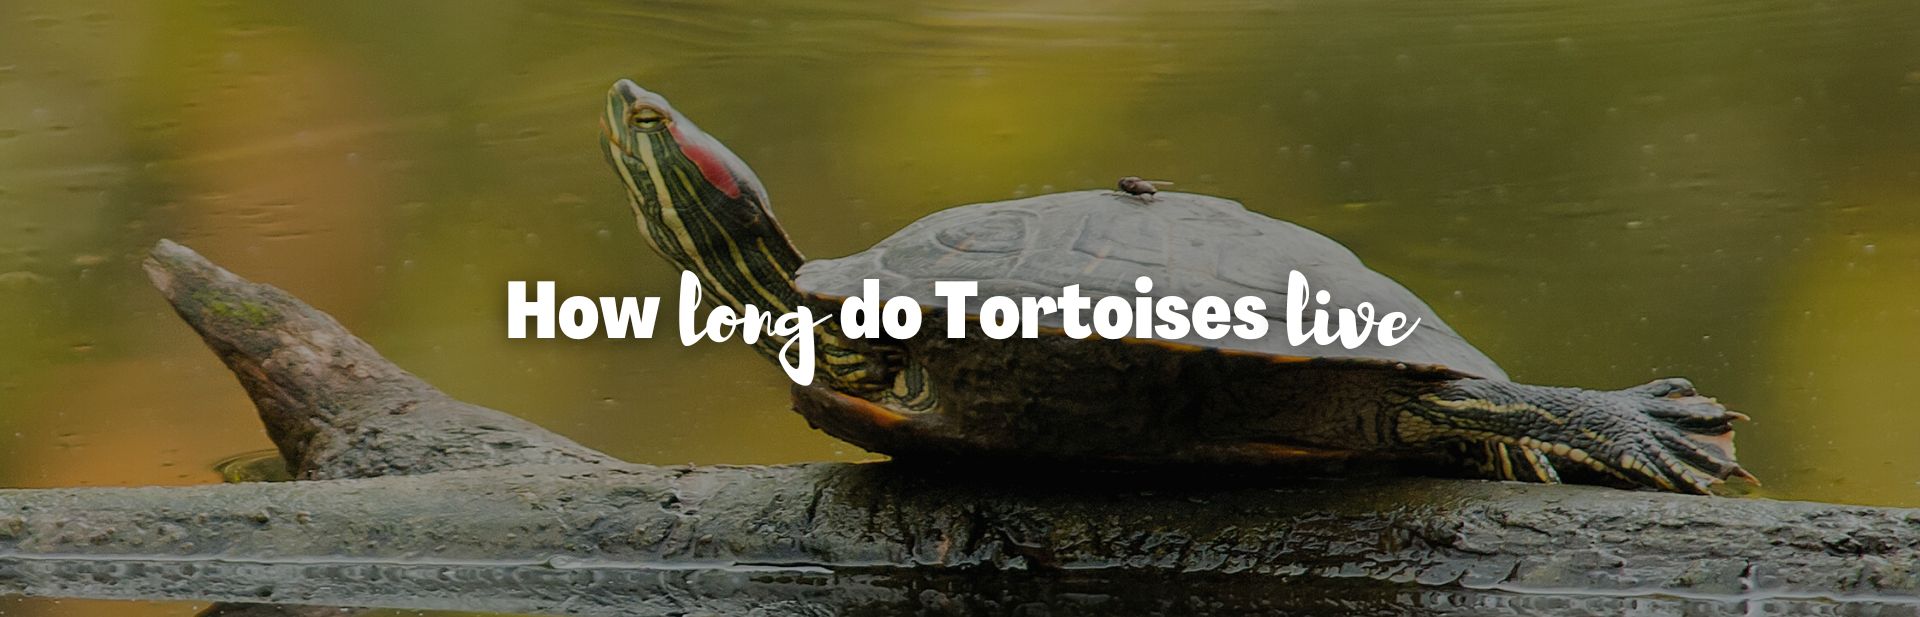 The Fascinating World of Tortoises: How Long Do Tortoises Live and Why?